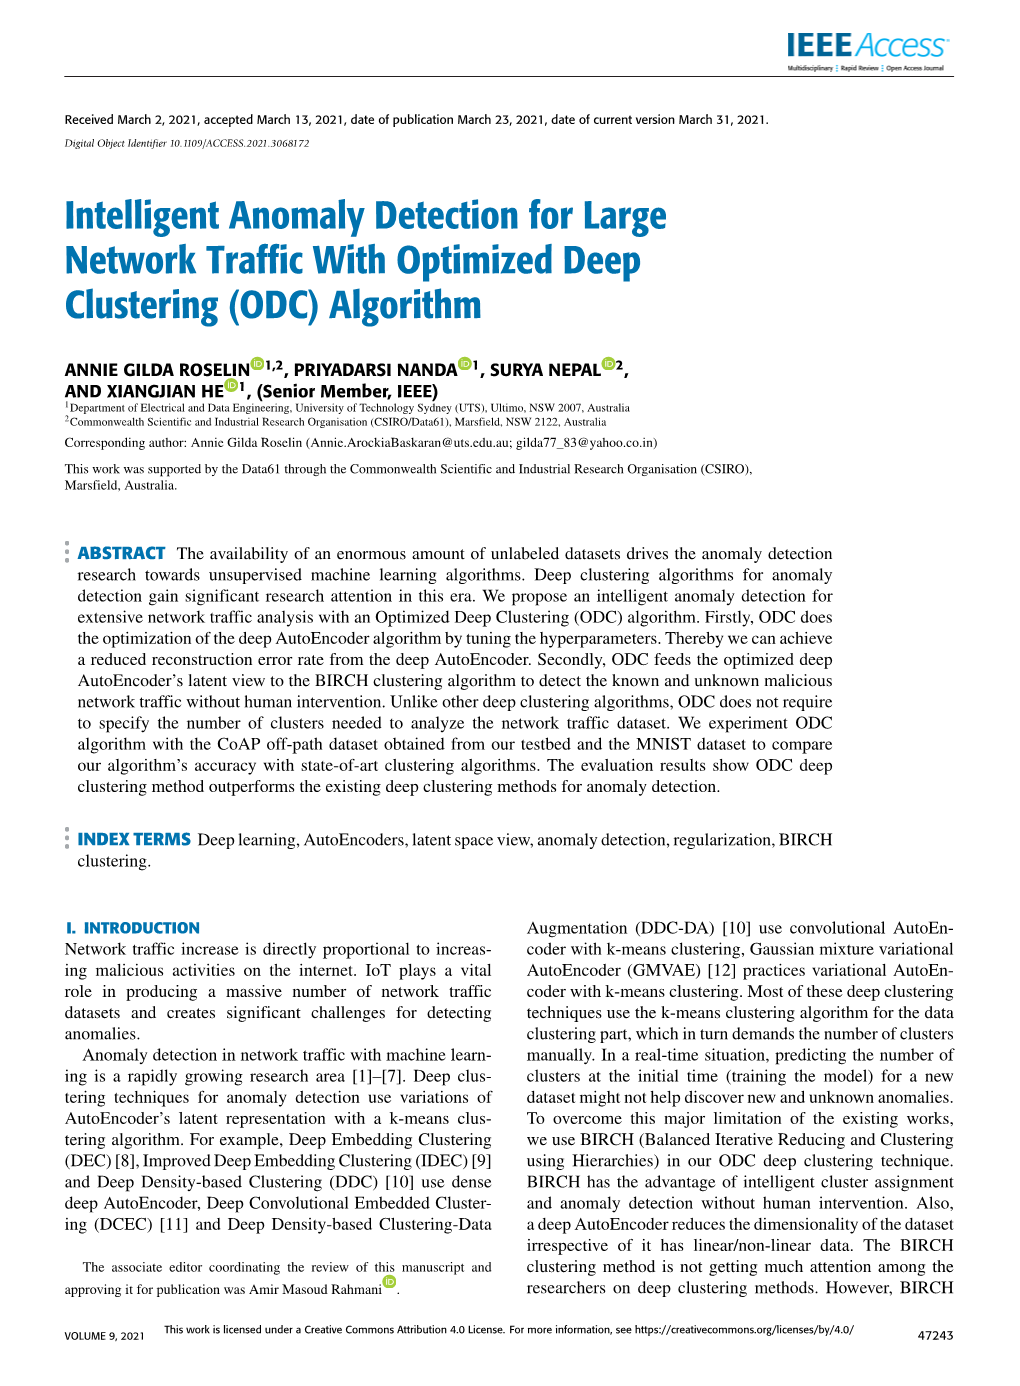 Intelligent Anomaly Detection for Large Network Traffic with Optimized Deep Clustering (ODC) Algorithm